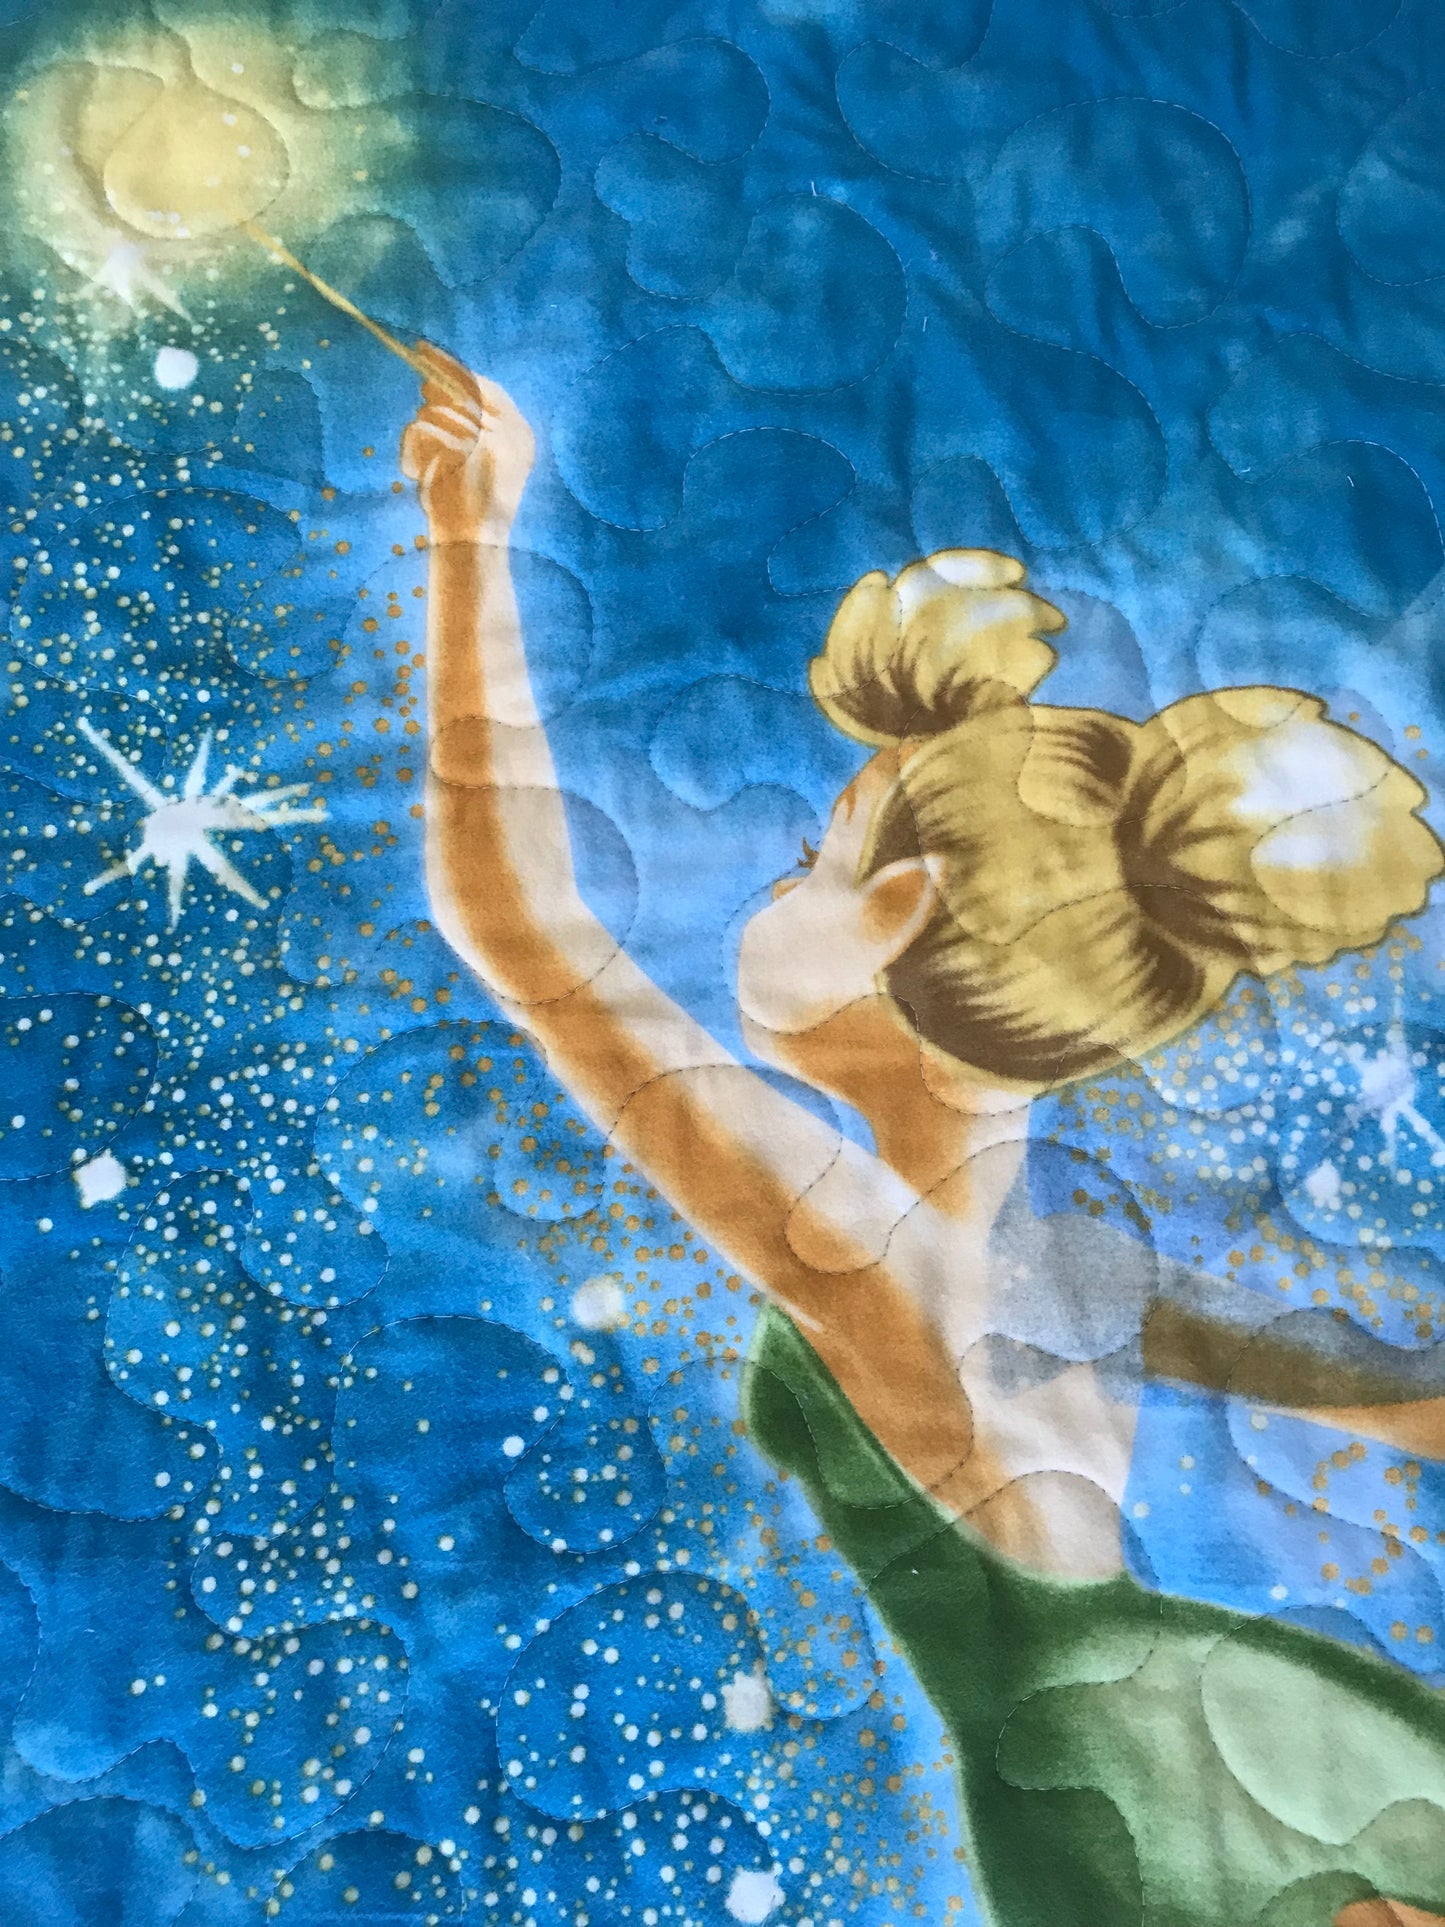 PETER PAN'S TINKER BELL "FLY TO NEVERLAND" Flannel Front Quilted Blanket 36"X44" nursery to adult lap blanket